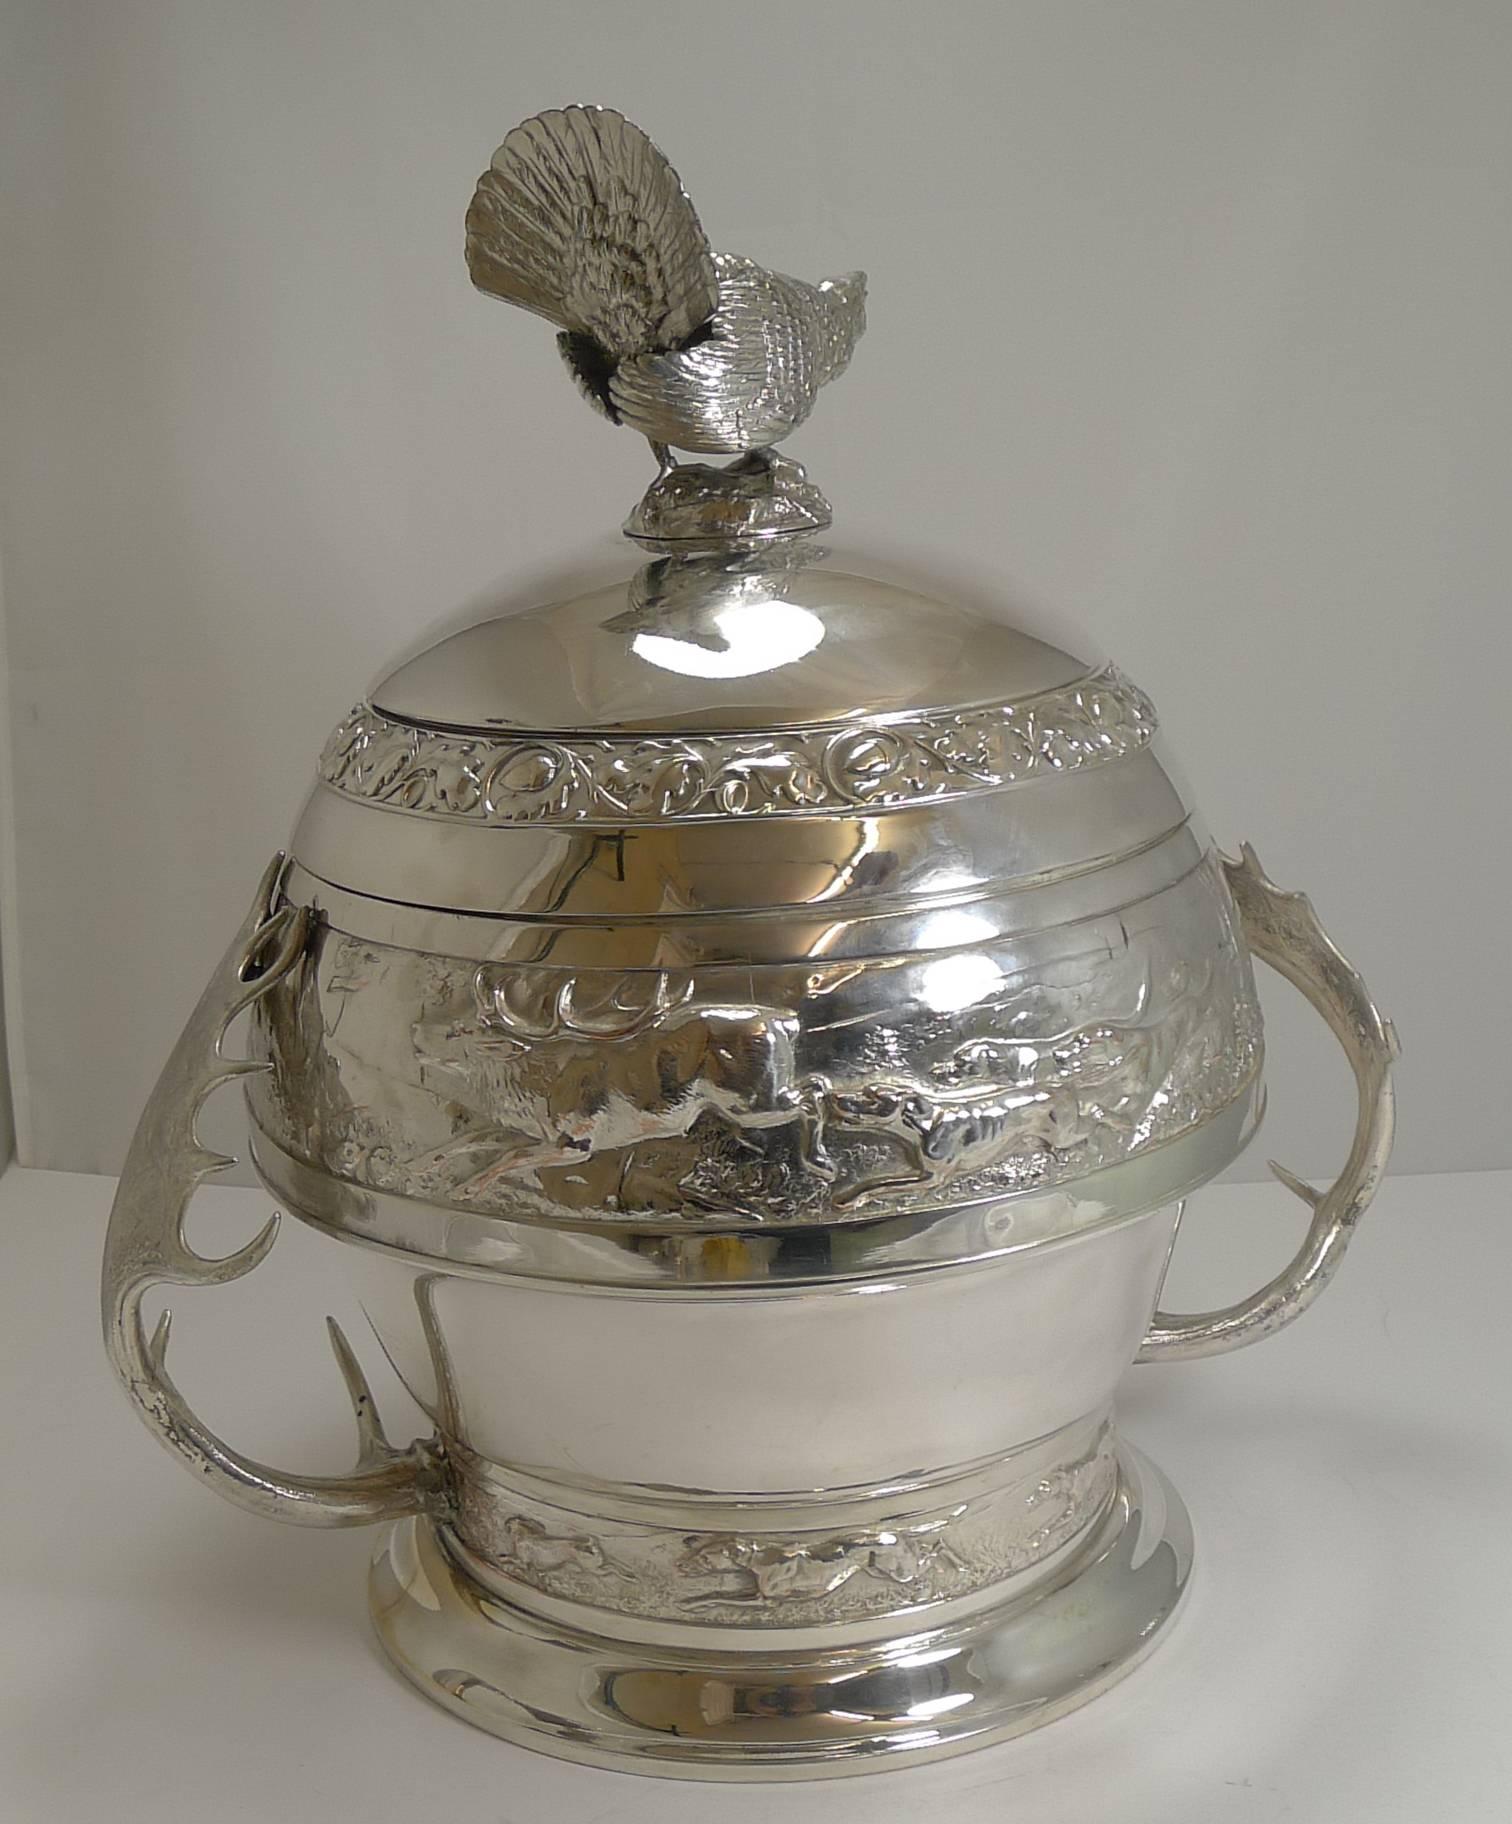 Grand Silver Plated Hunting Tureen by WMF, circa 1920, Signed 9